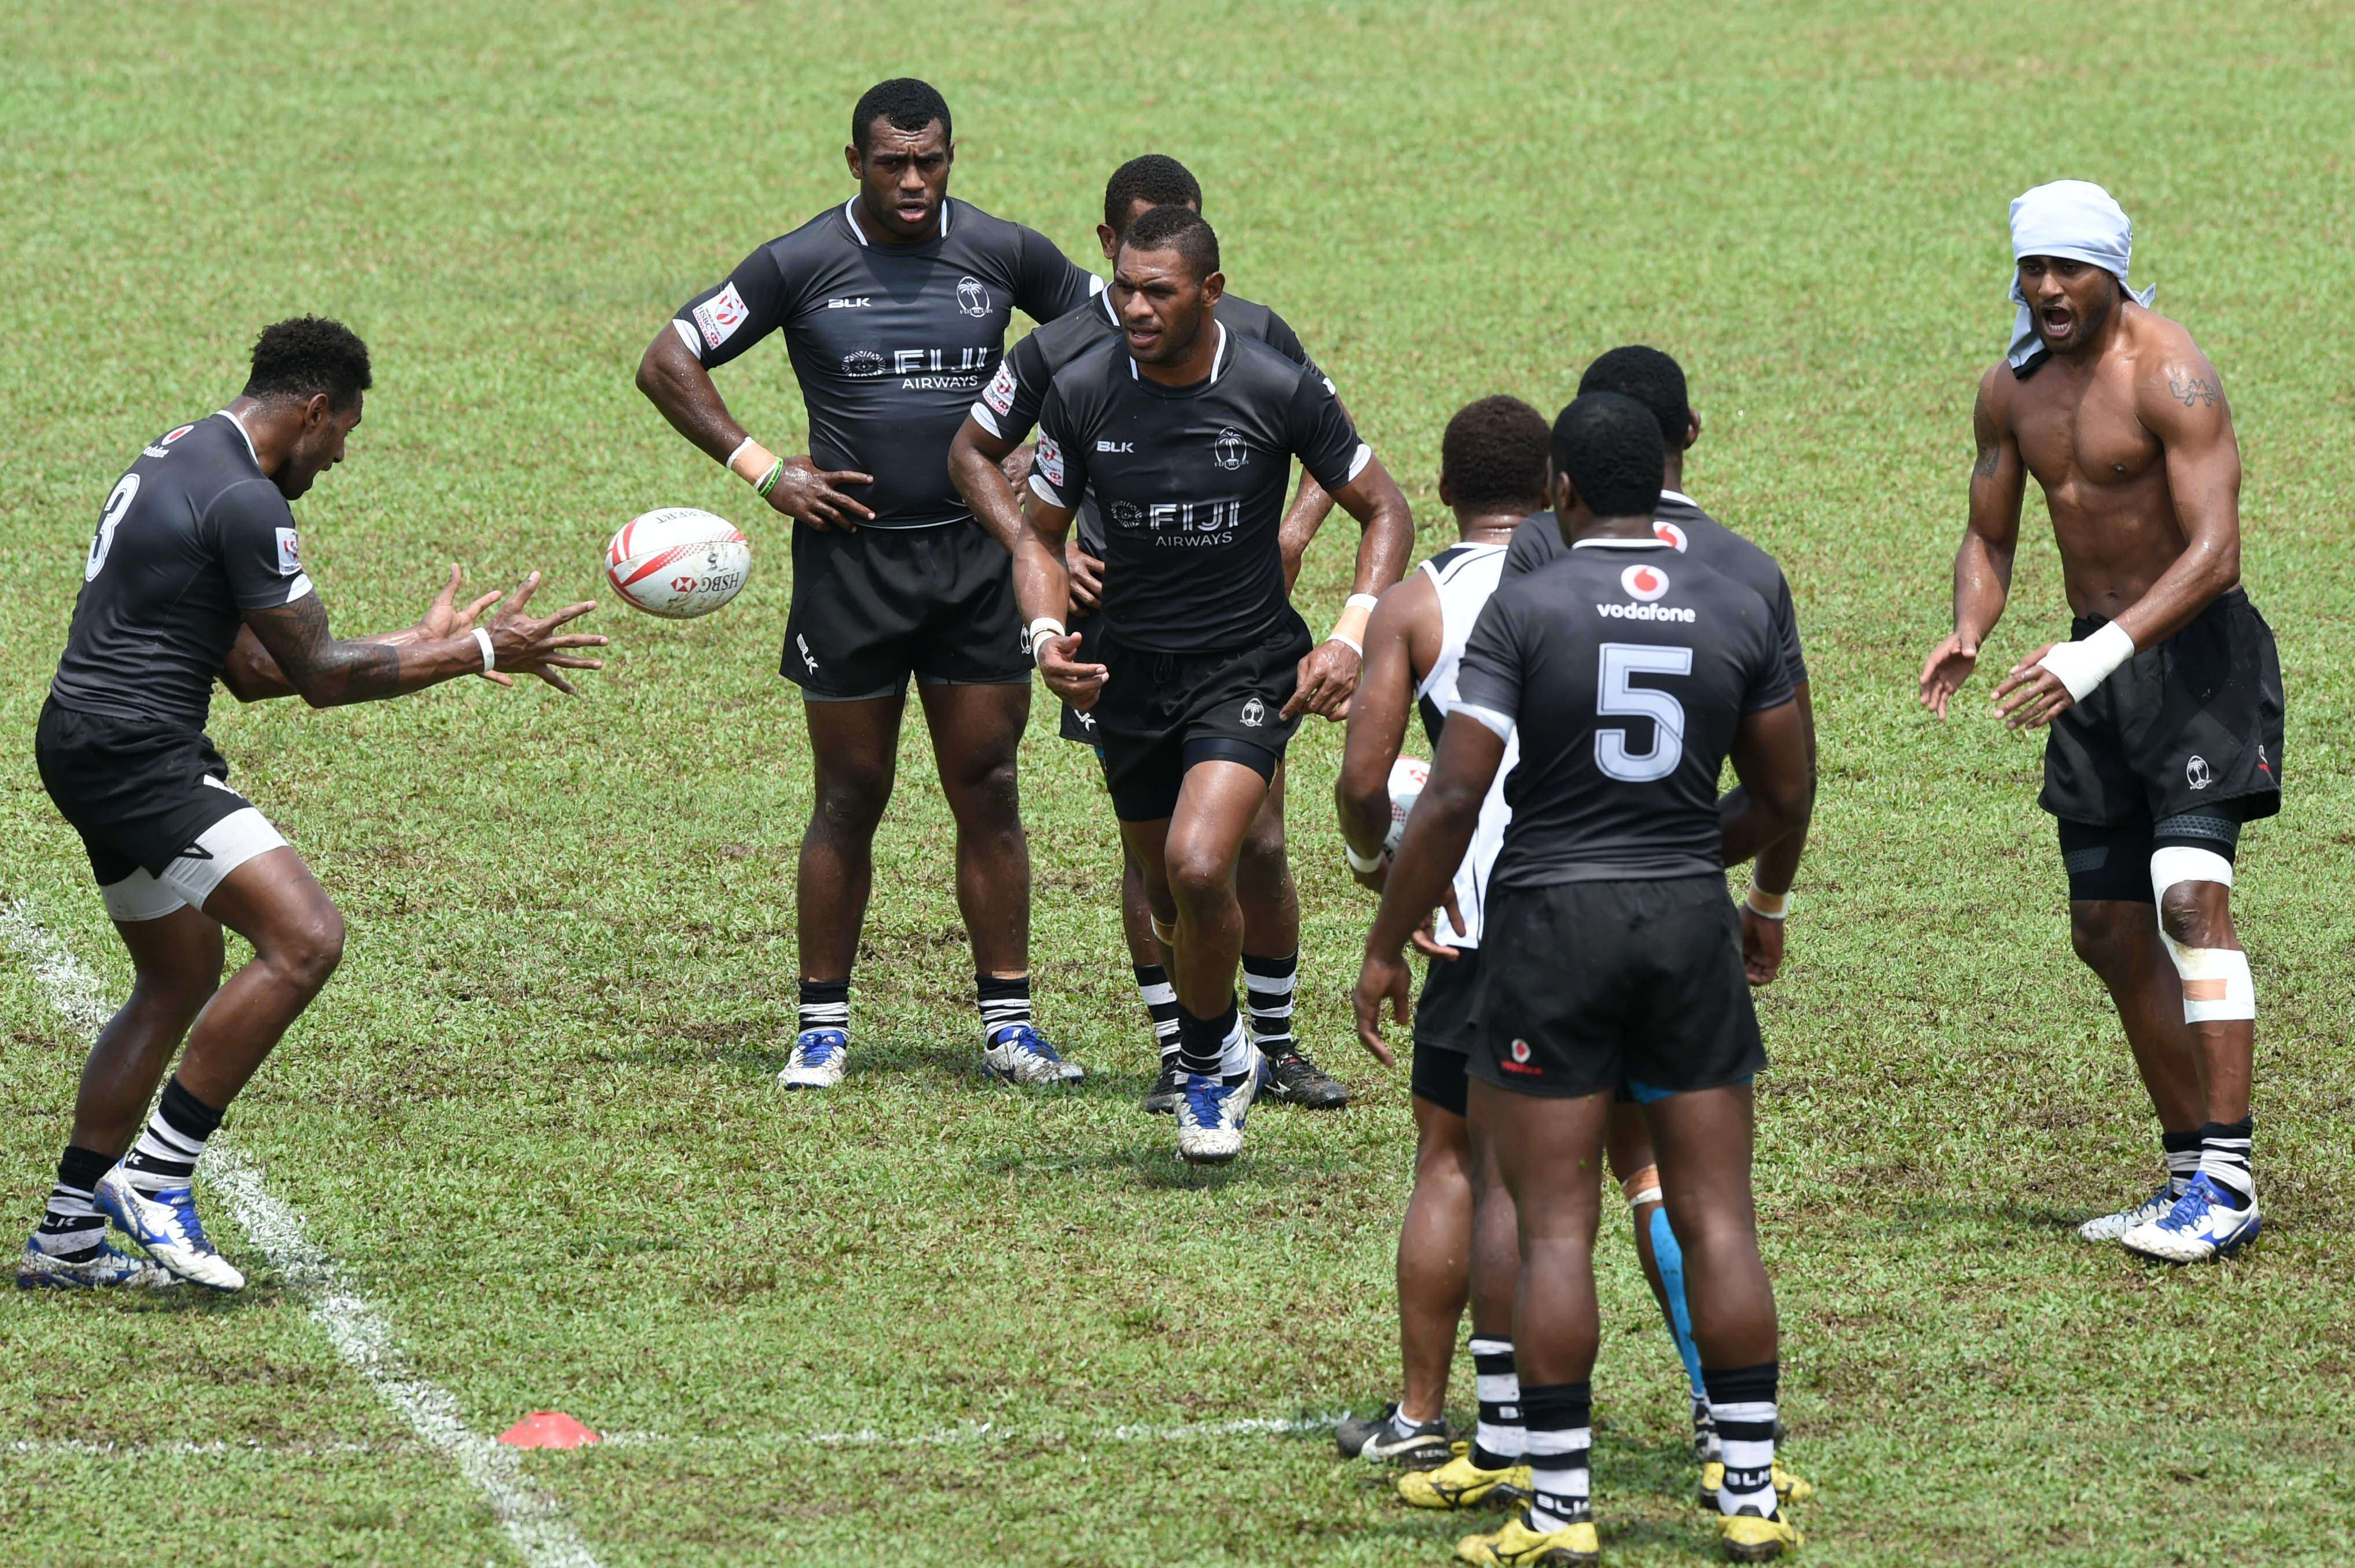 Fiji's players attend a training session ahead of the Singapore Seven this weekend. Photo: AFP